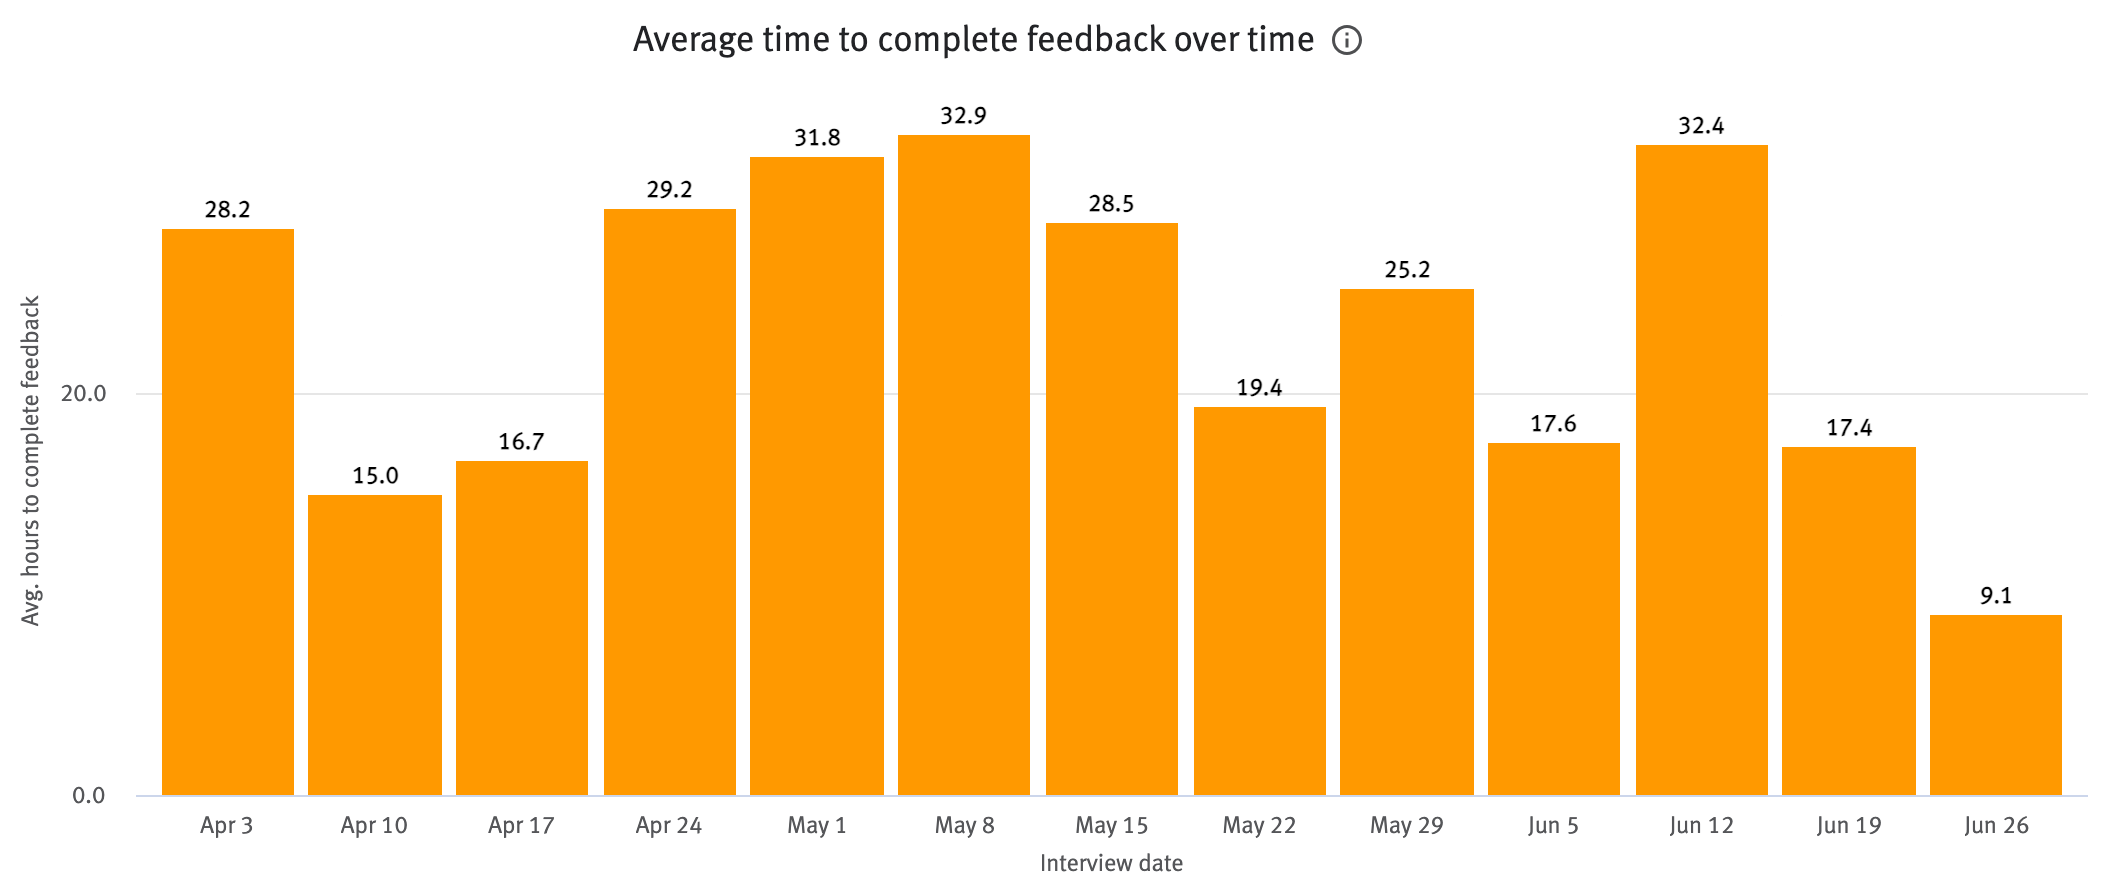 Average time to completed feedback over time chart